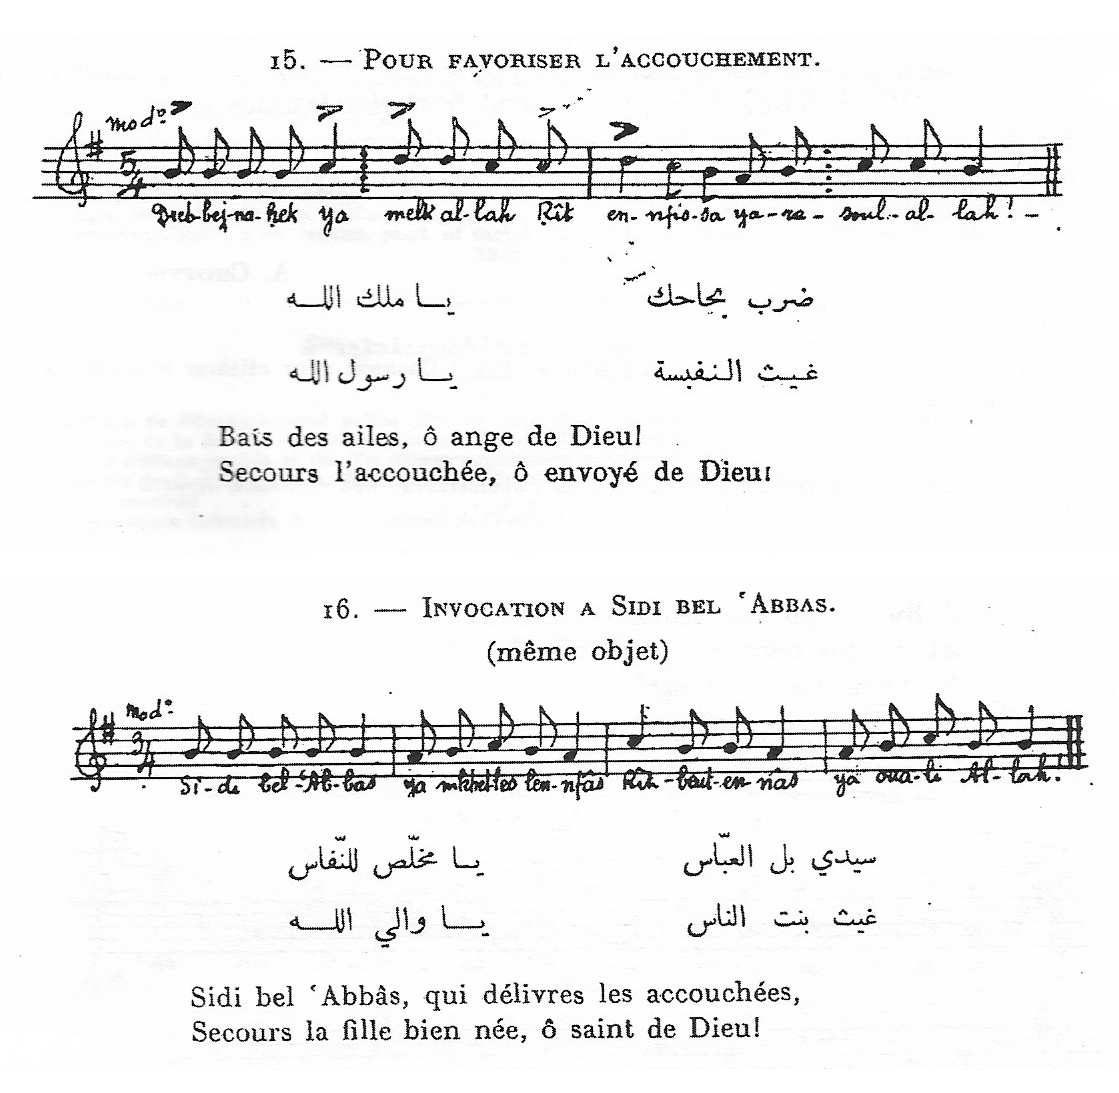 Sheet music, with lyrics in French and Arabic. The two pieces are entitled "Pour favoriser l'accouchement" and "Invocation a Sidi bel 'Abbas"